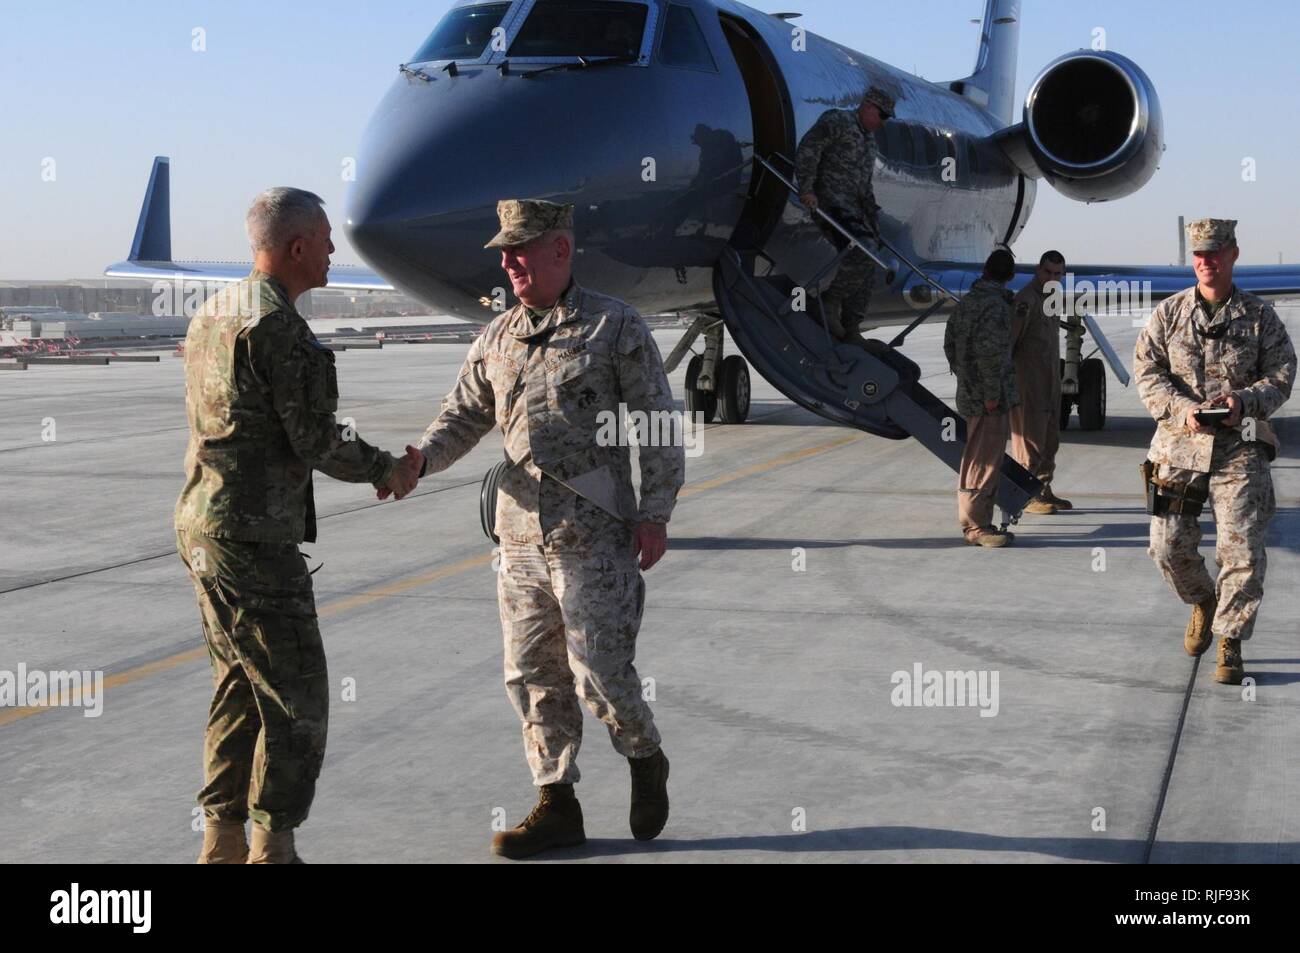 KANDAHAR, Afghanistan (December 26, 2011). Gen. James Huggin of the 82nd Airborne Division greets and shacks hands with Marine Gen James Mattis of US Central Command (USCENTCOM) right after Gen Mattis stepped of his plain on Kandahar Air Field’s. Stock Photo